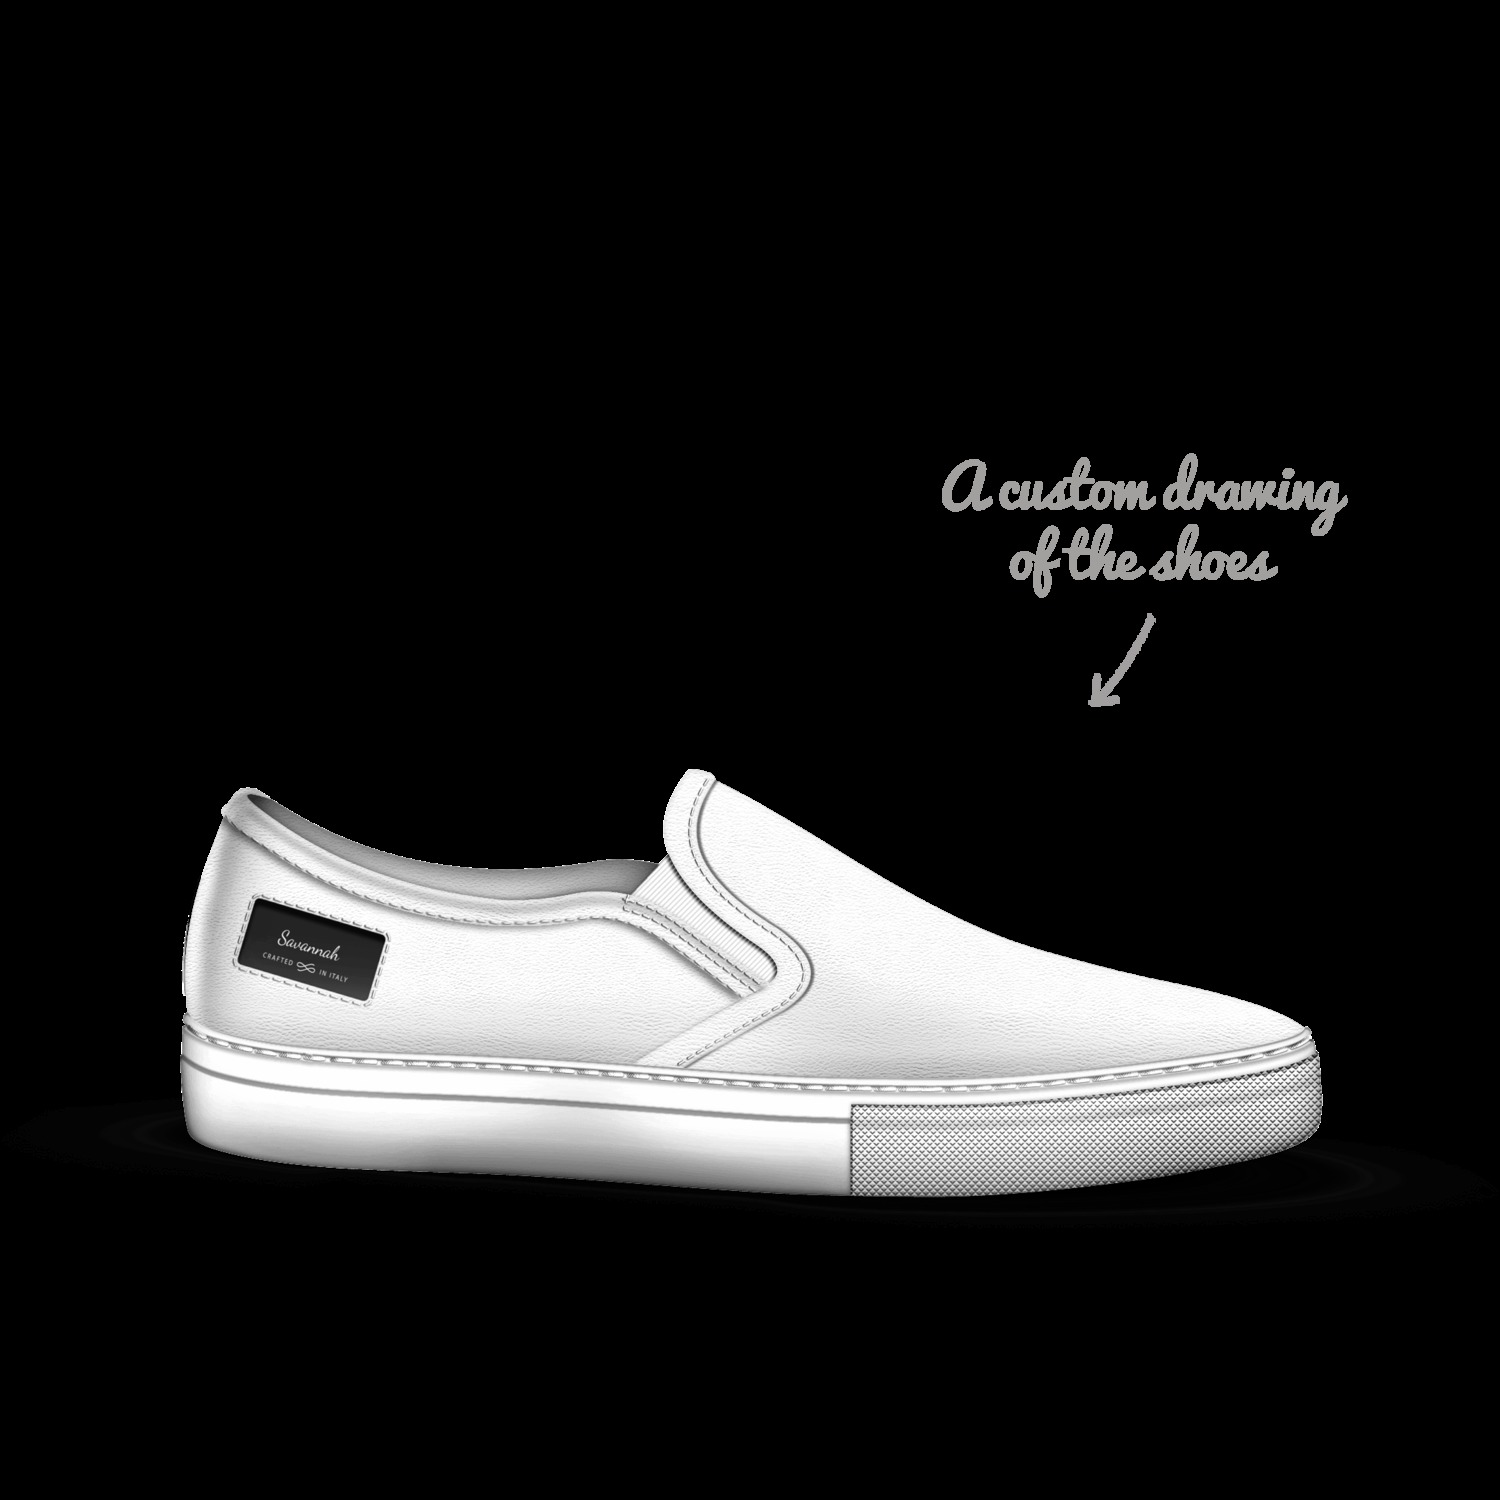 A Custom Shoe concept by Savannah Koster